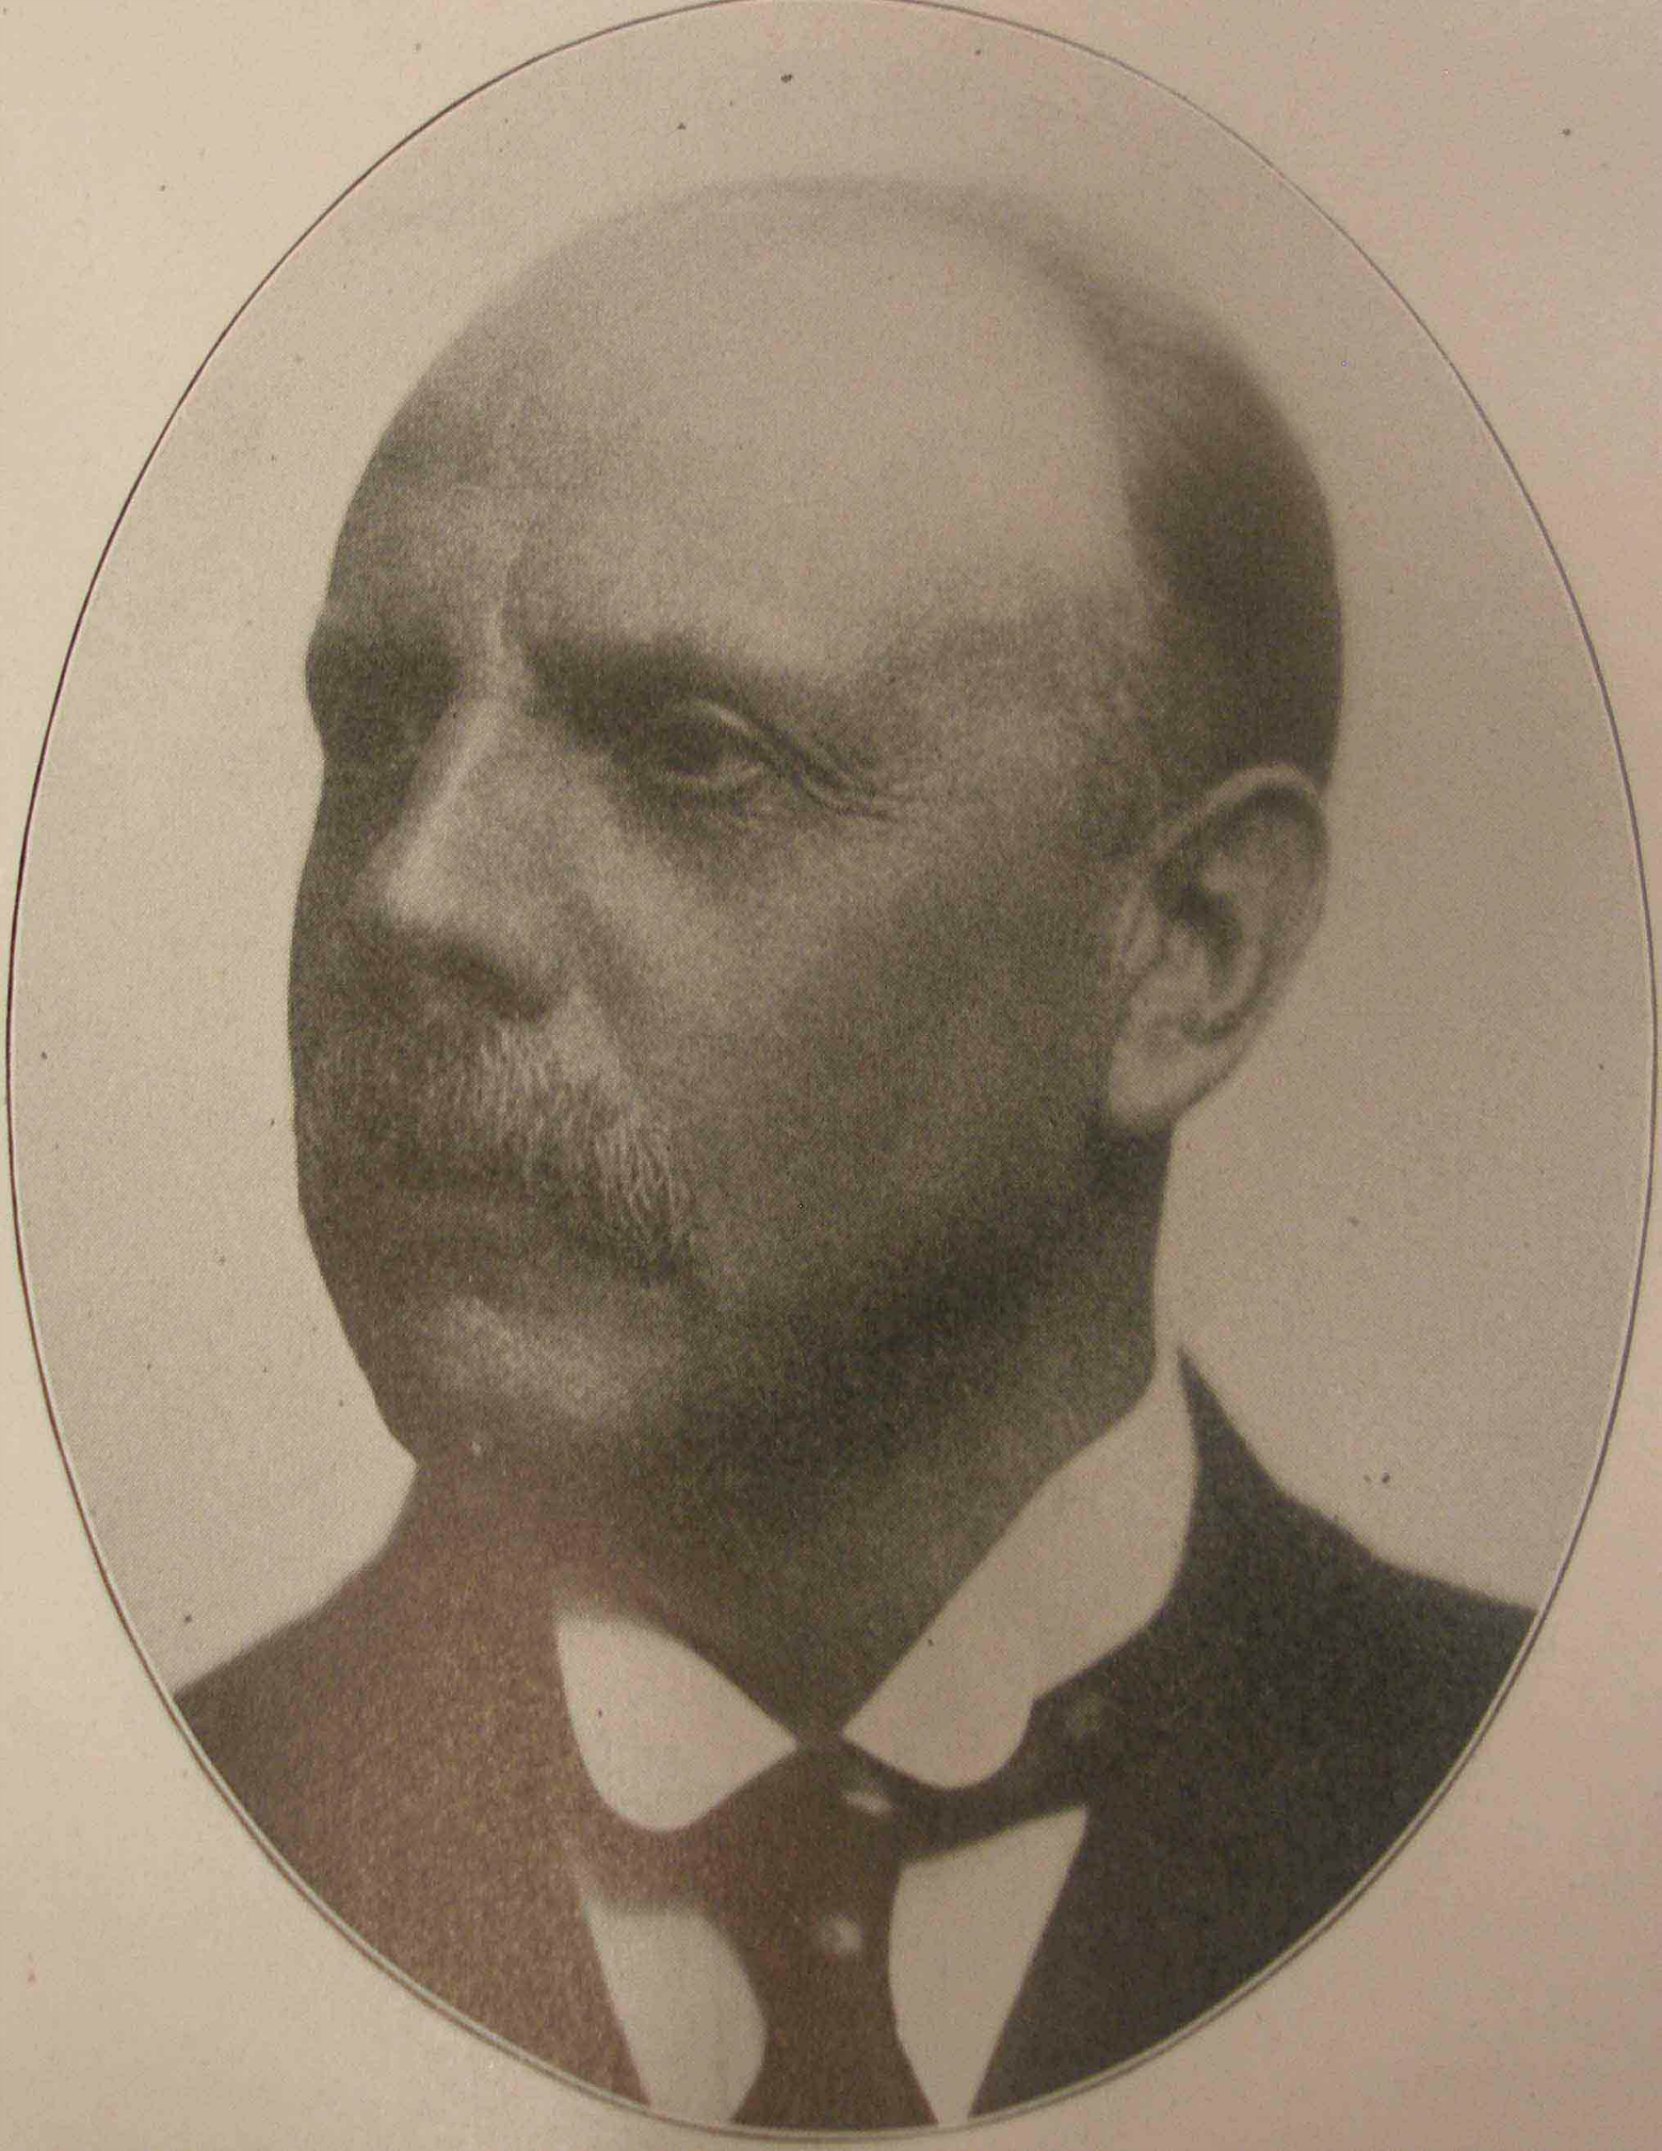 David Russell Ker (1862-1923) was a member of Victoria-Columbia Lodge, No.1 in Victoria, B.C.